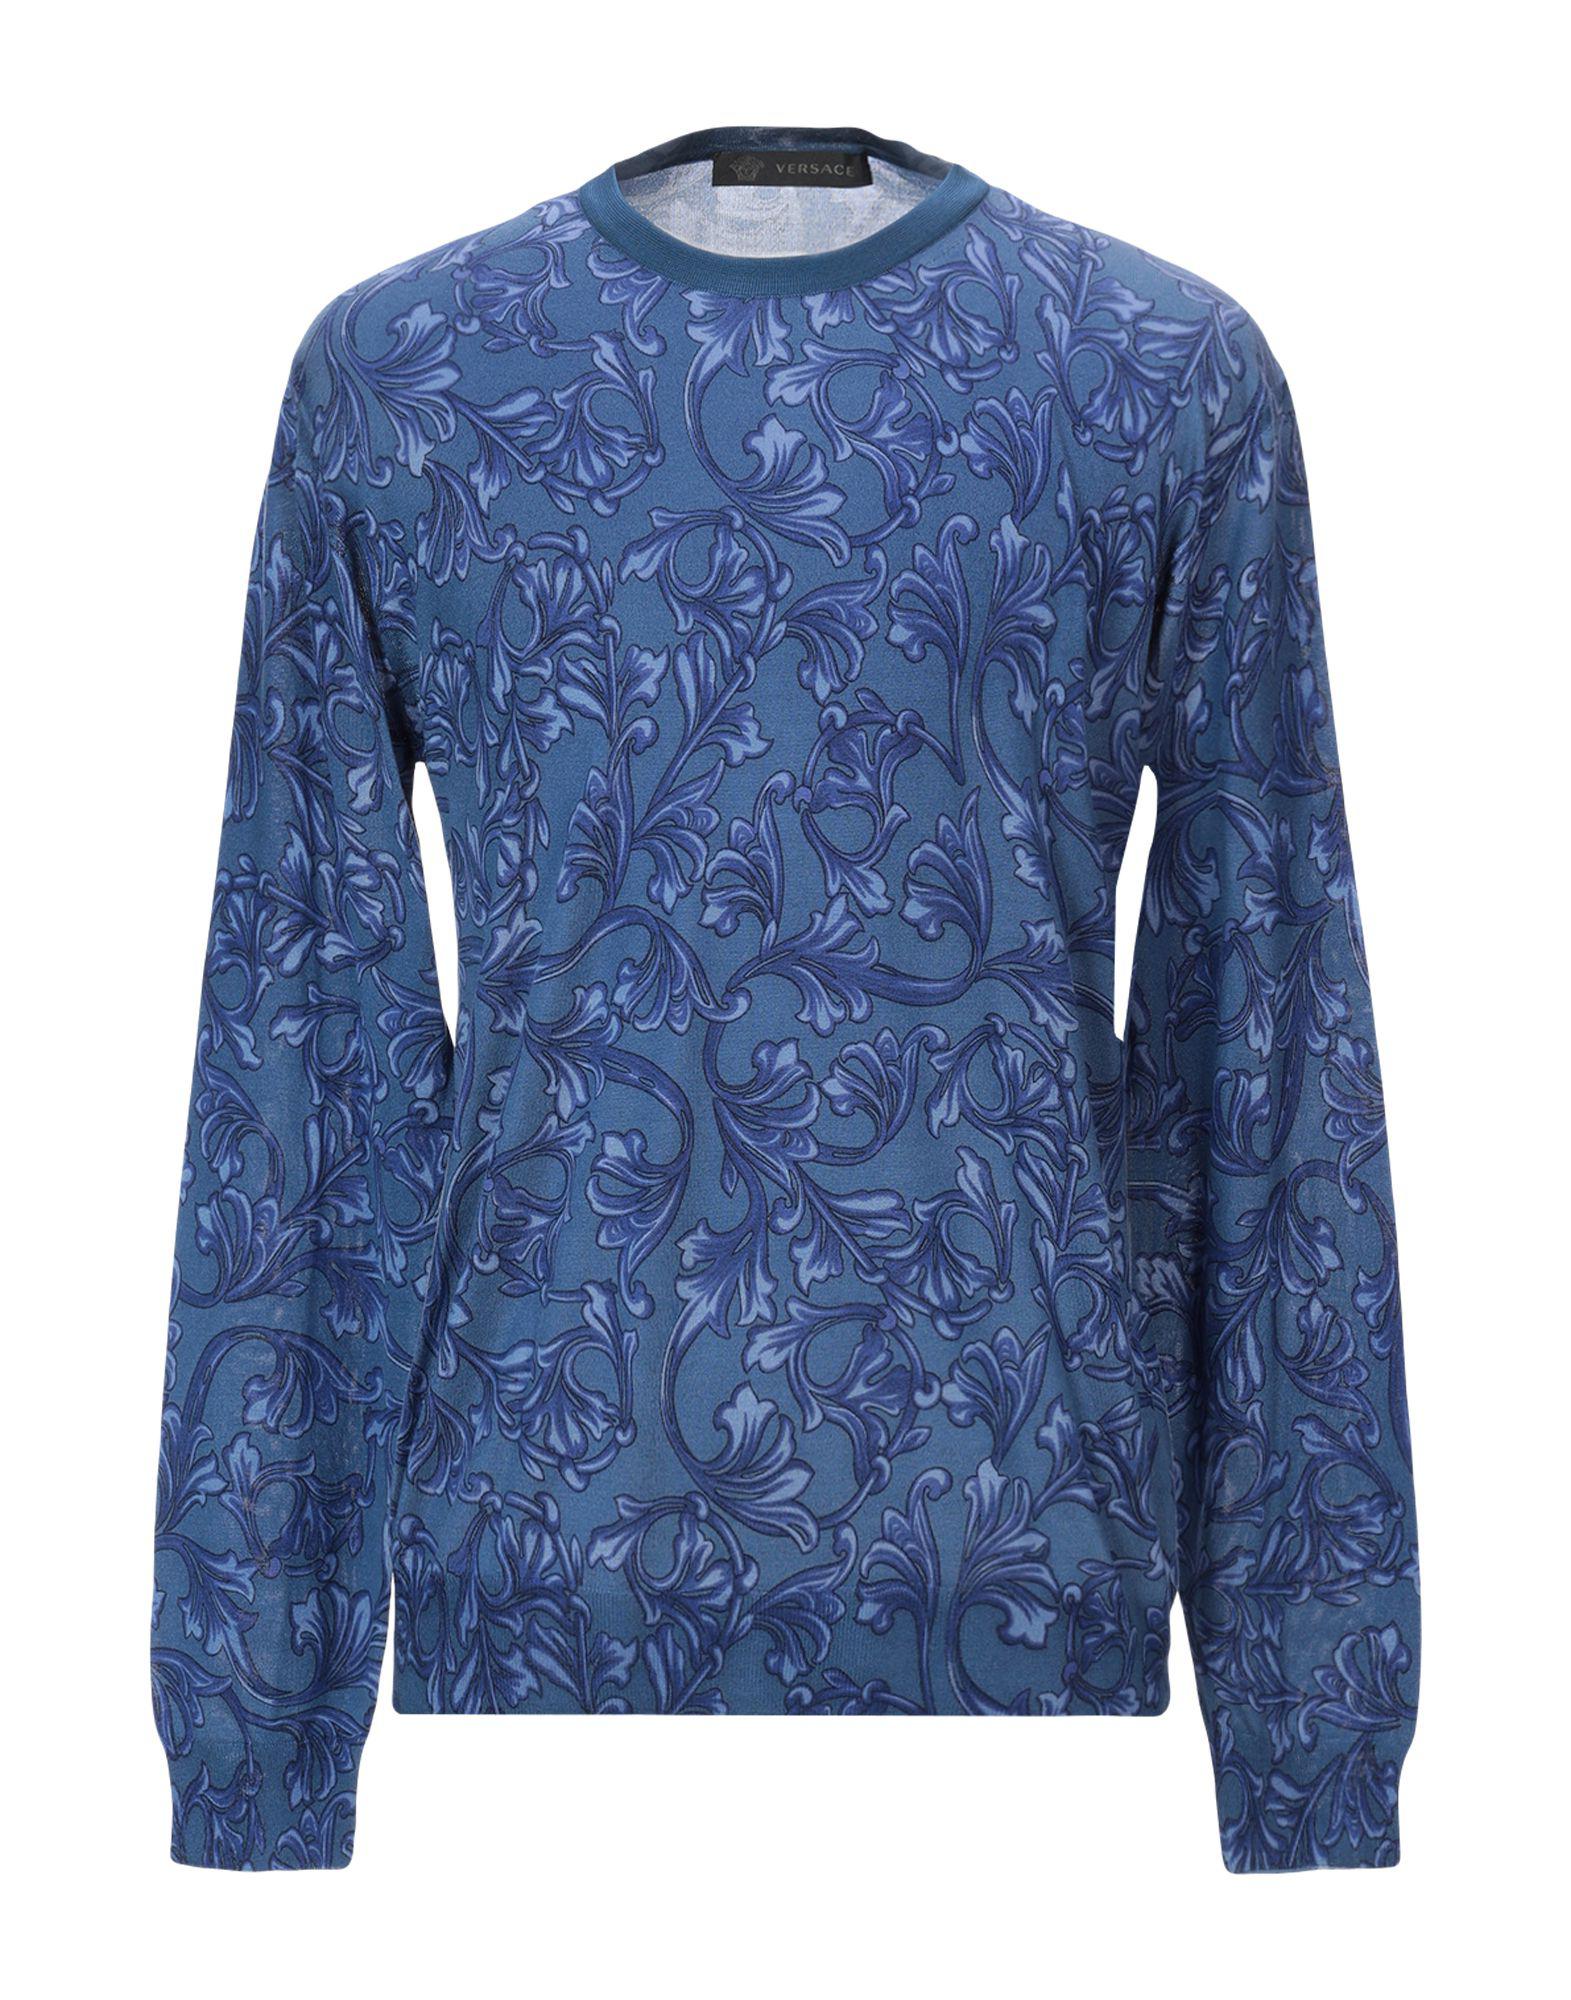 Lyst - Versace Sweater in Blue for Men